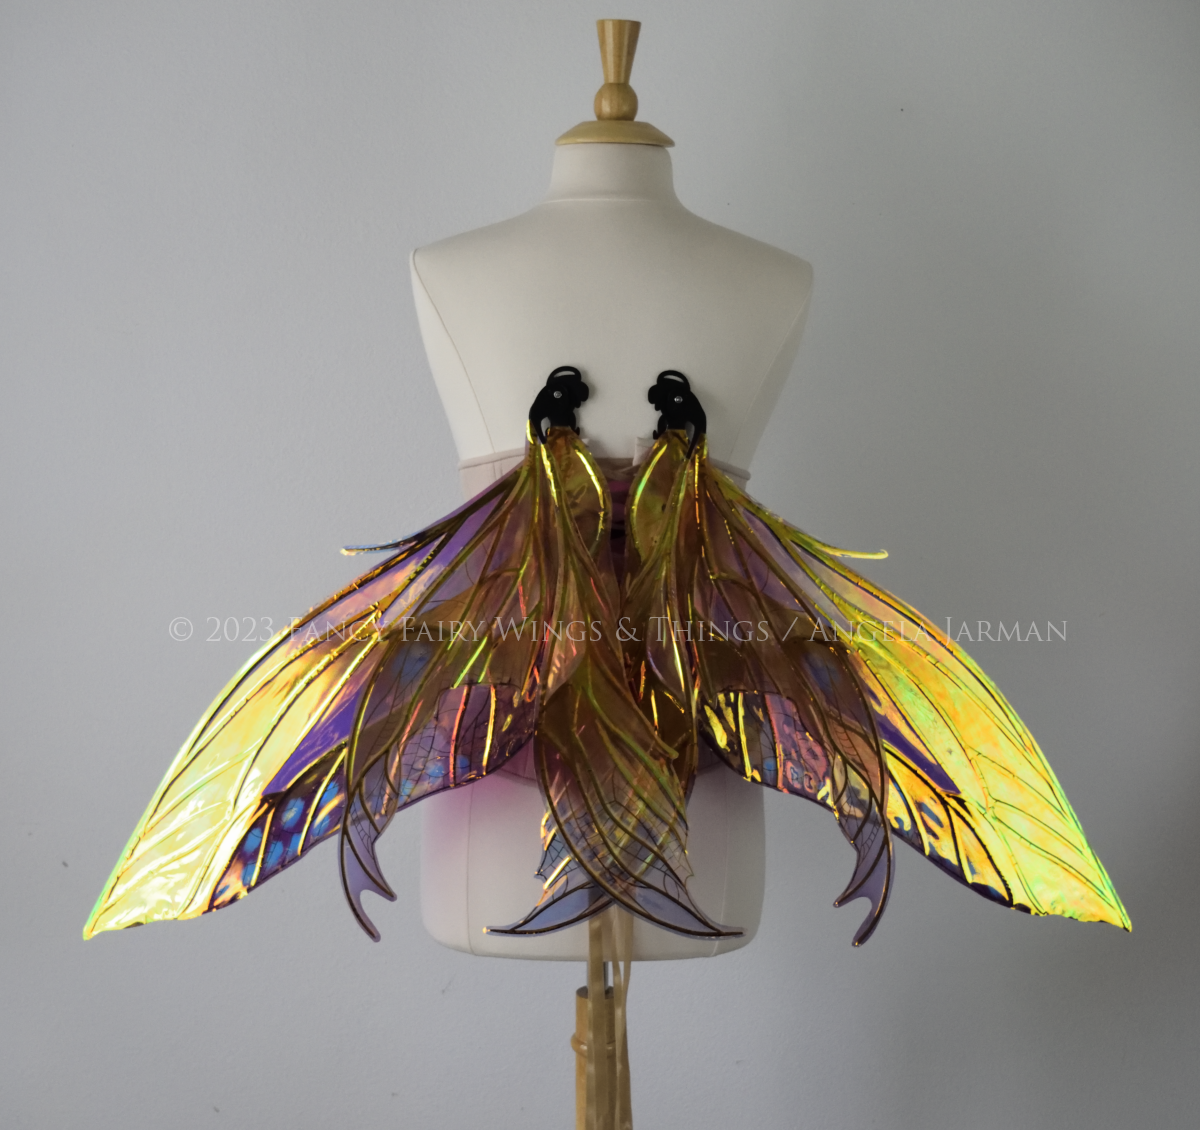 Back view of large burgundy and peach pink iridescent fairy wings with 3 panels on each side, pointed tips, lots of vein detail, worn on a dress form, in resting position.